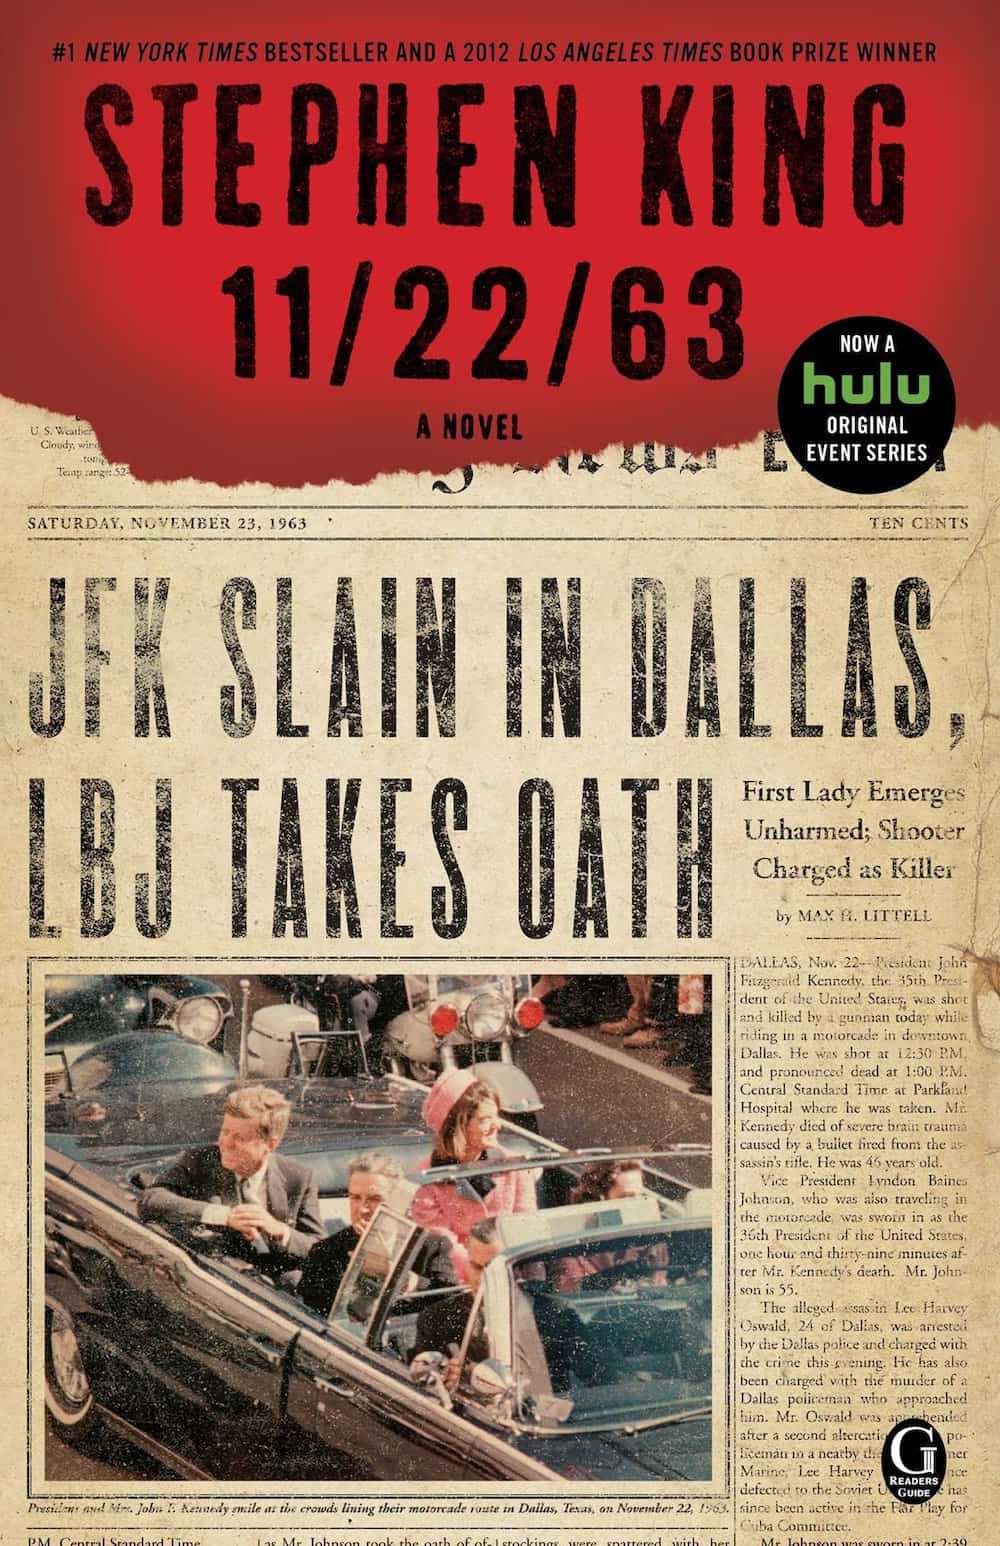 The cover of 11/22/63